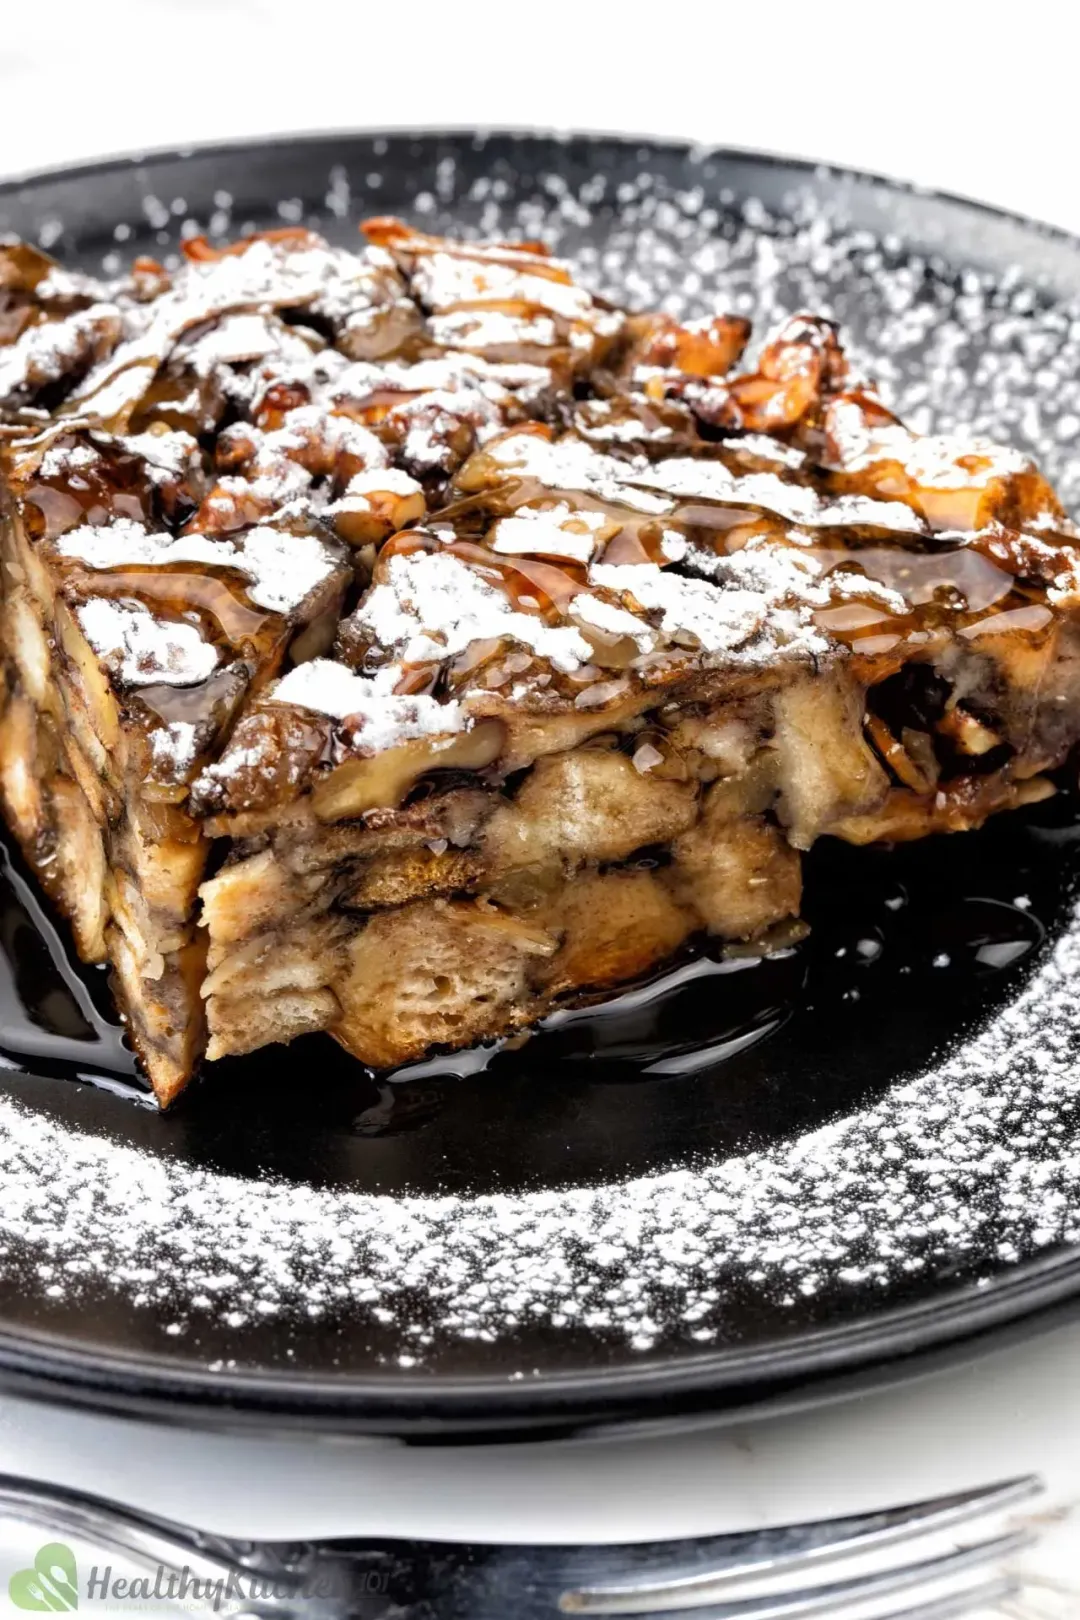 A quarter of a large french toast casserole topped with powdered sugar